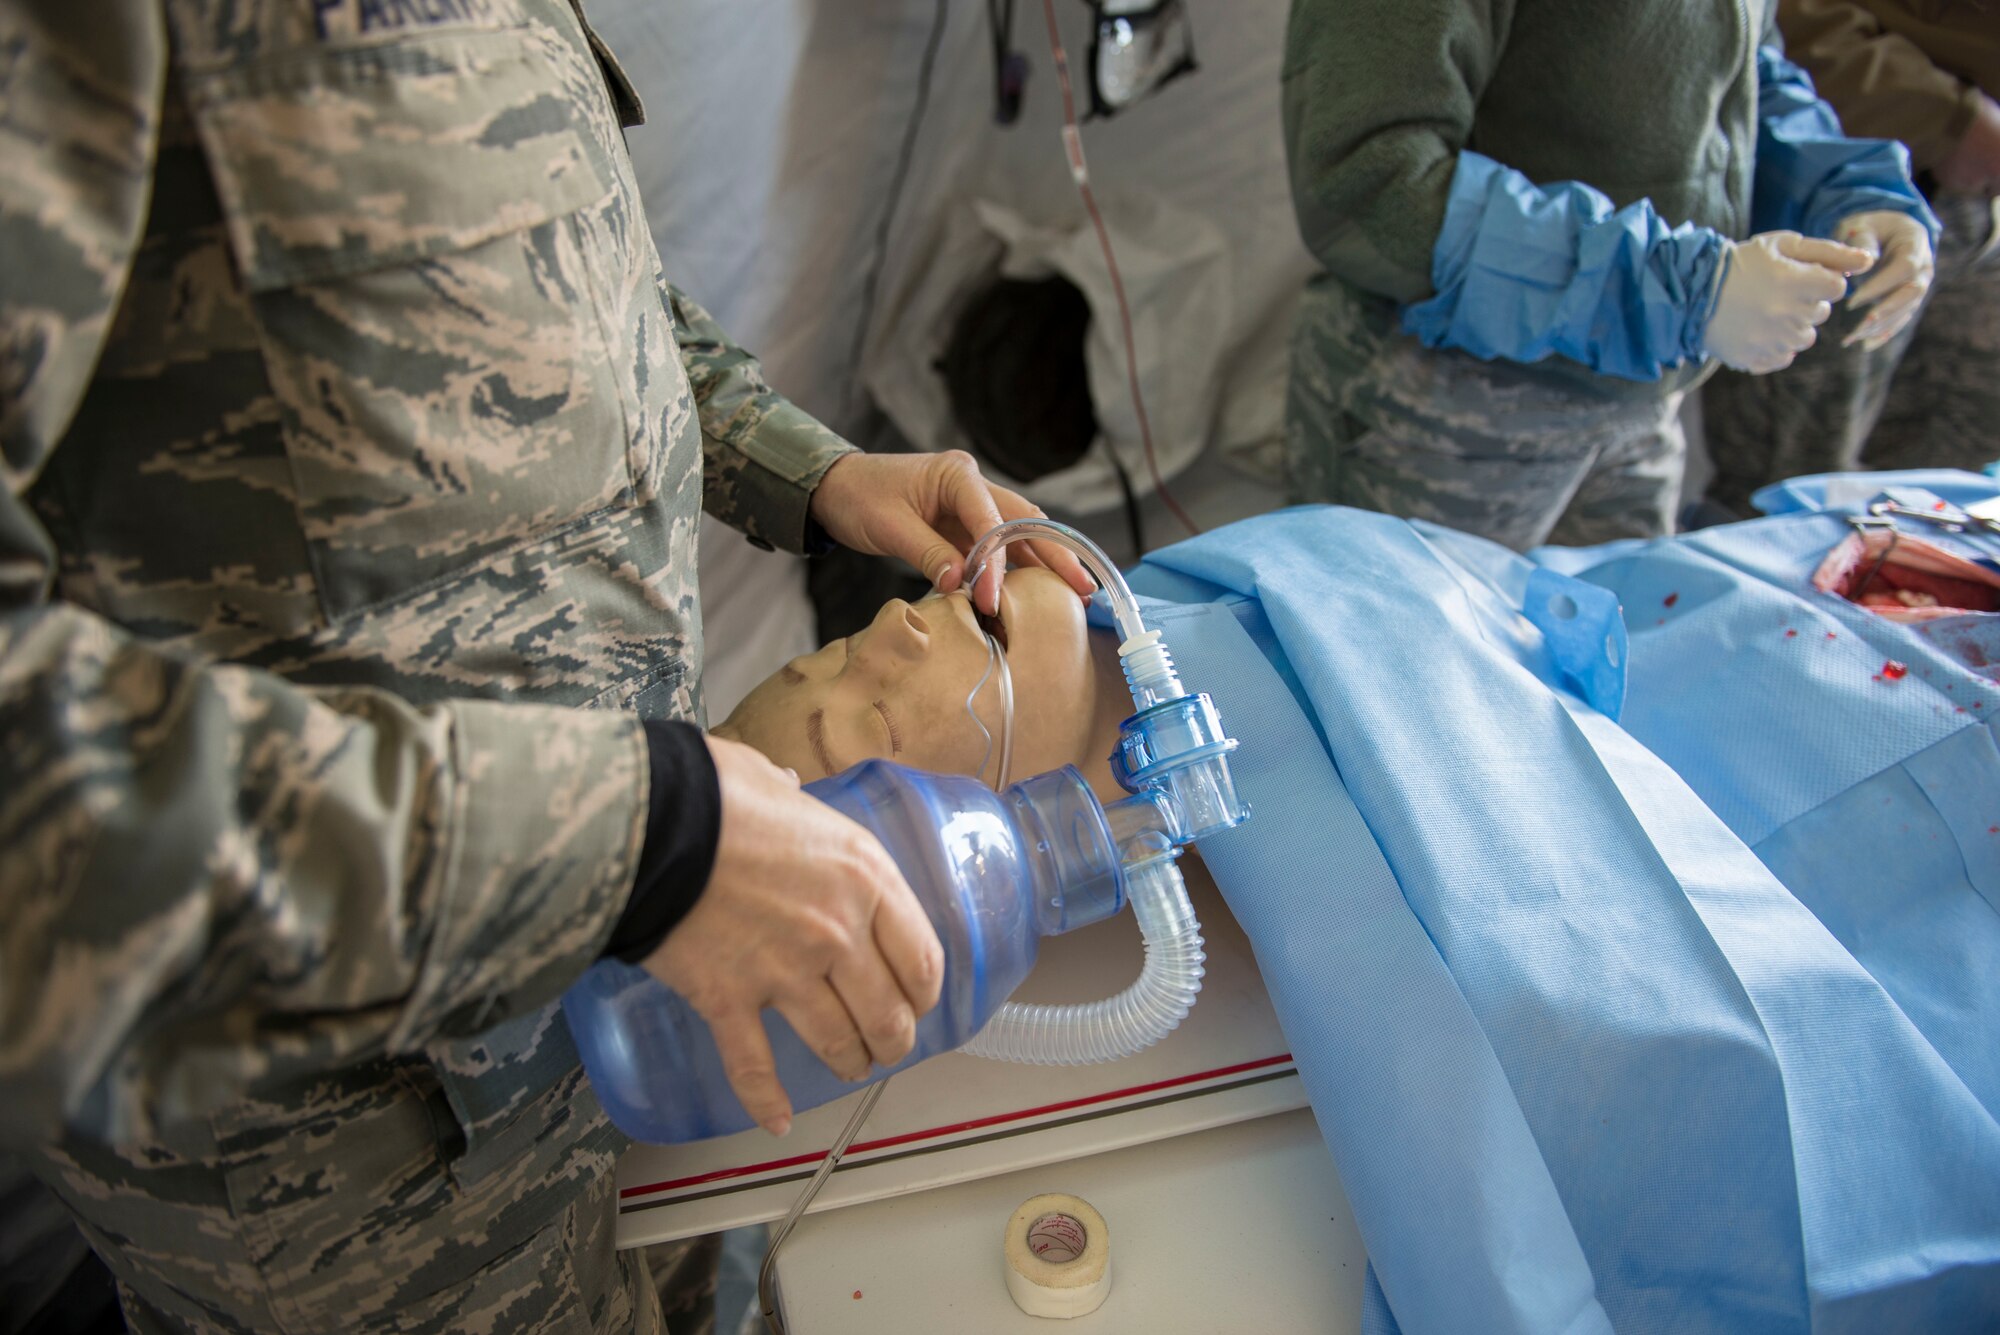 Maj. Cynthia Parent, 141st Medical Group nurse anesthetist, simulates manual ventilation on a manikin during Gunfighter Flag 16-1 at Mountain Home Air Force Base, Idaho, Nov. 5, 2015. Parent is part of an Air National Guard unit out of Spokane, Washington. (U.S. Air Force photo by Airman 1st Class Jessica H. Evans/RELEASED)